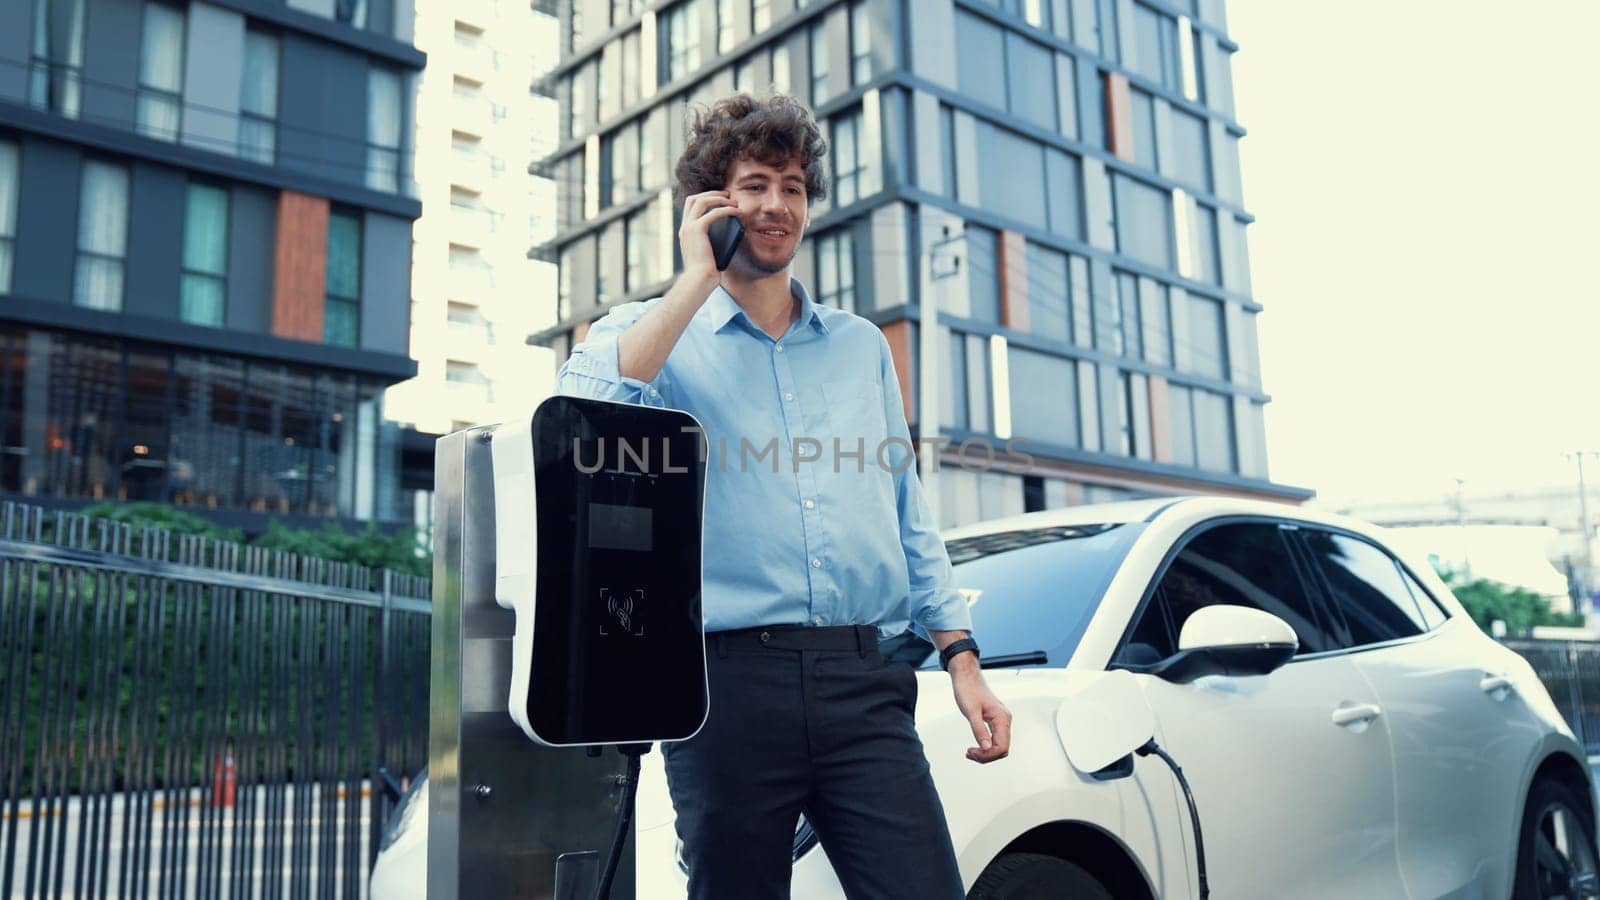 Suit-clad businessman with progressive ambition leaning on his electric vehicle while standing on a charging station with a power cable plug and a renewable energy-powered electric vehicle.